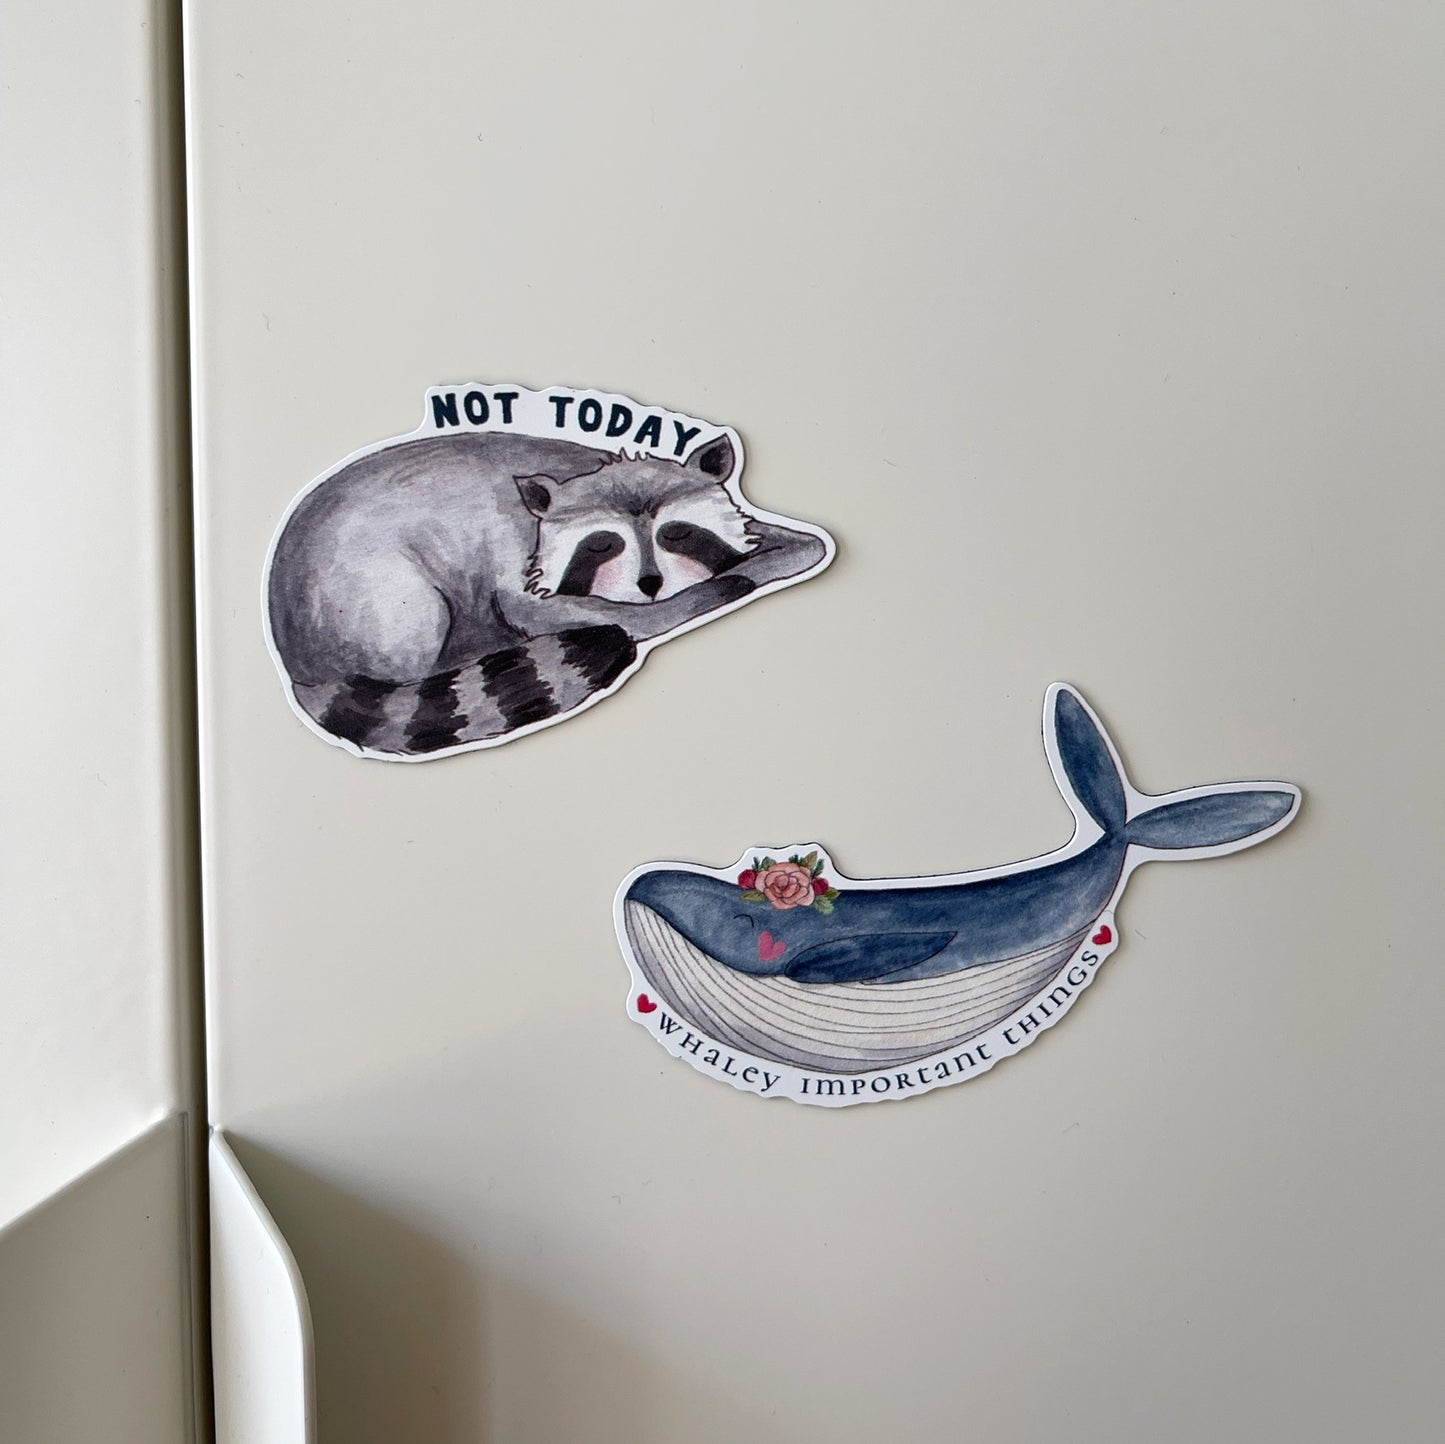 Whaley Important Things Decorative Magnet